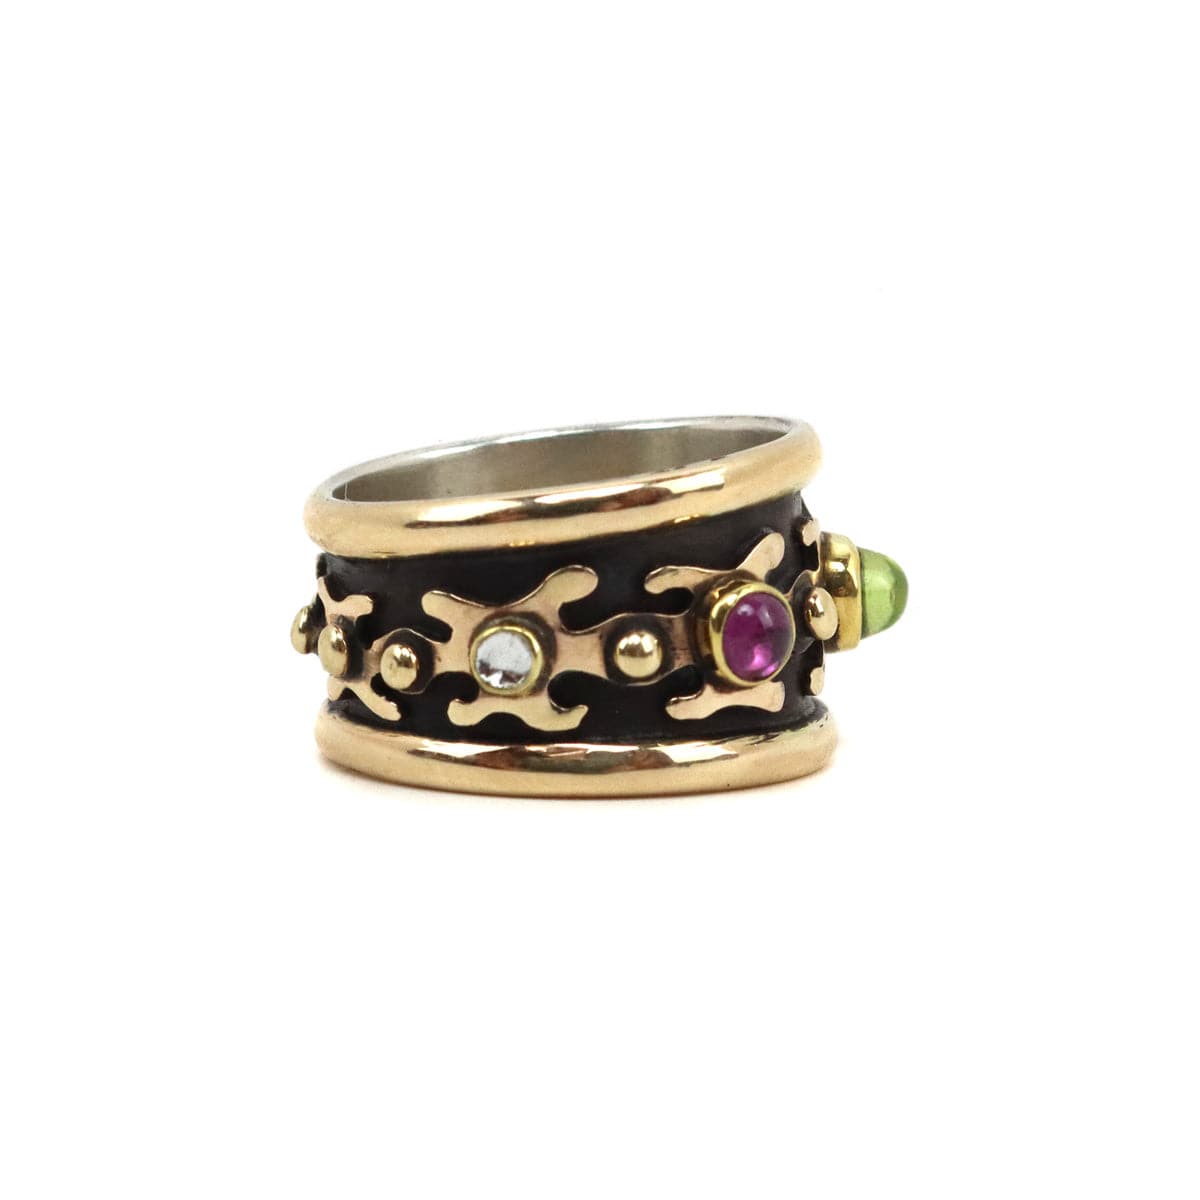 Frank Patania Jr. - Multi-Stone and 14K Gold Overlay Ring, size 10.5 (J91699-1222-002) 1